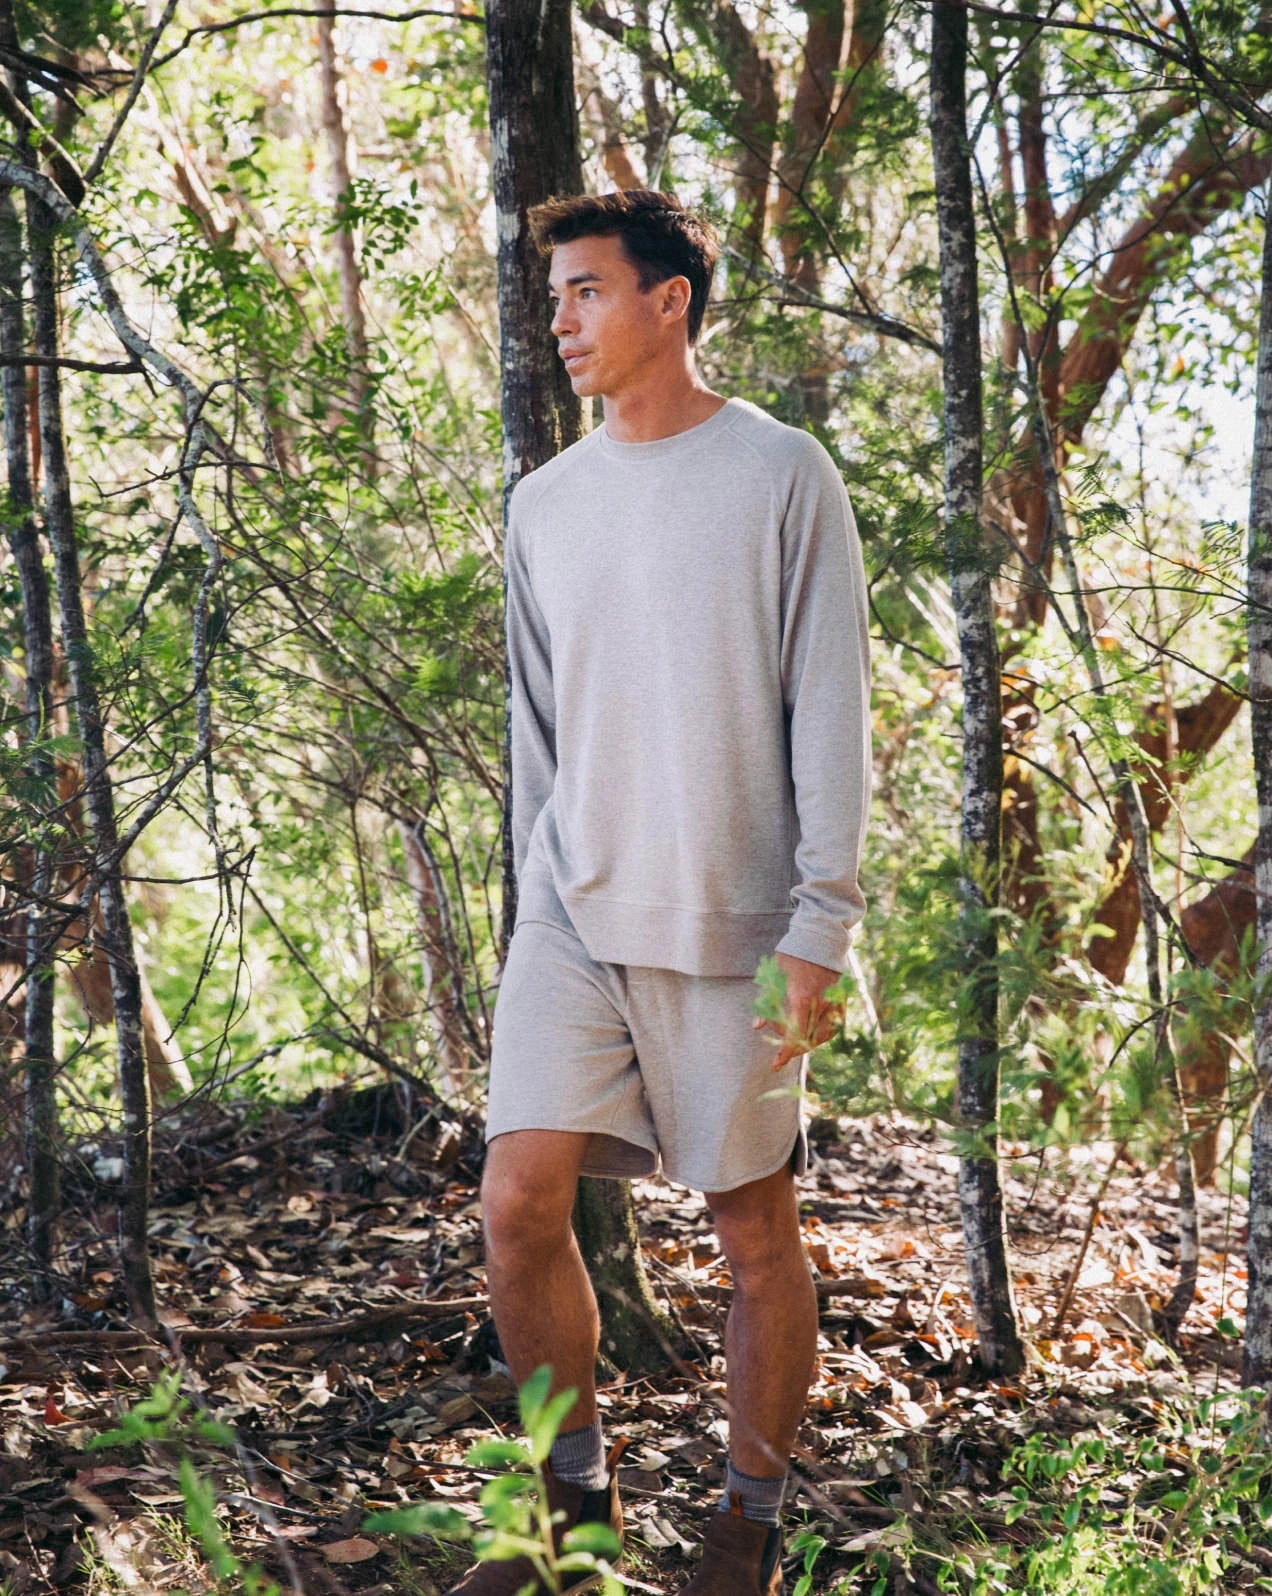 A guy standing in the nature, wearing our alpaca Terry garments in gray